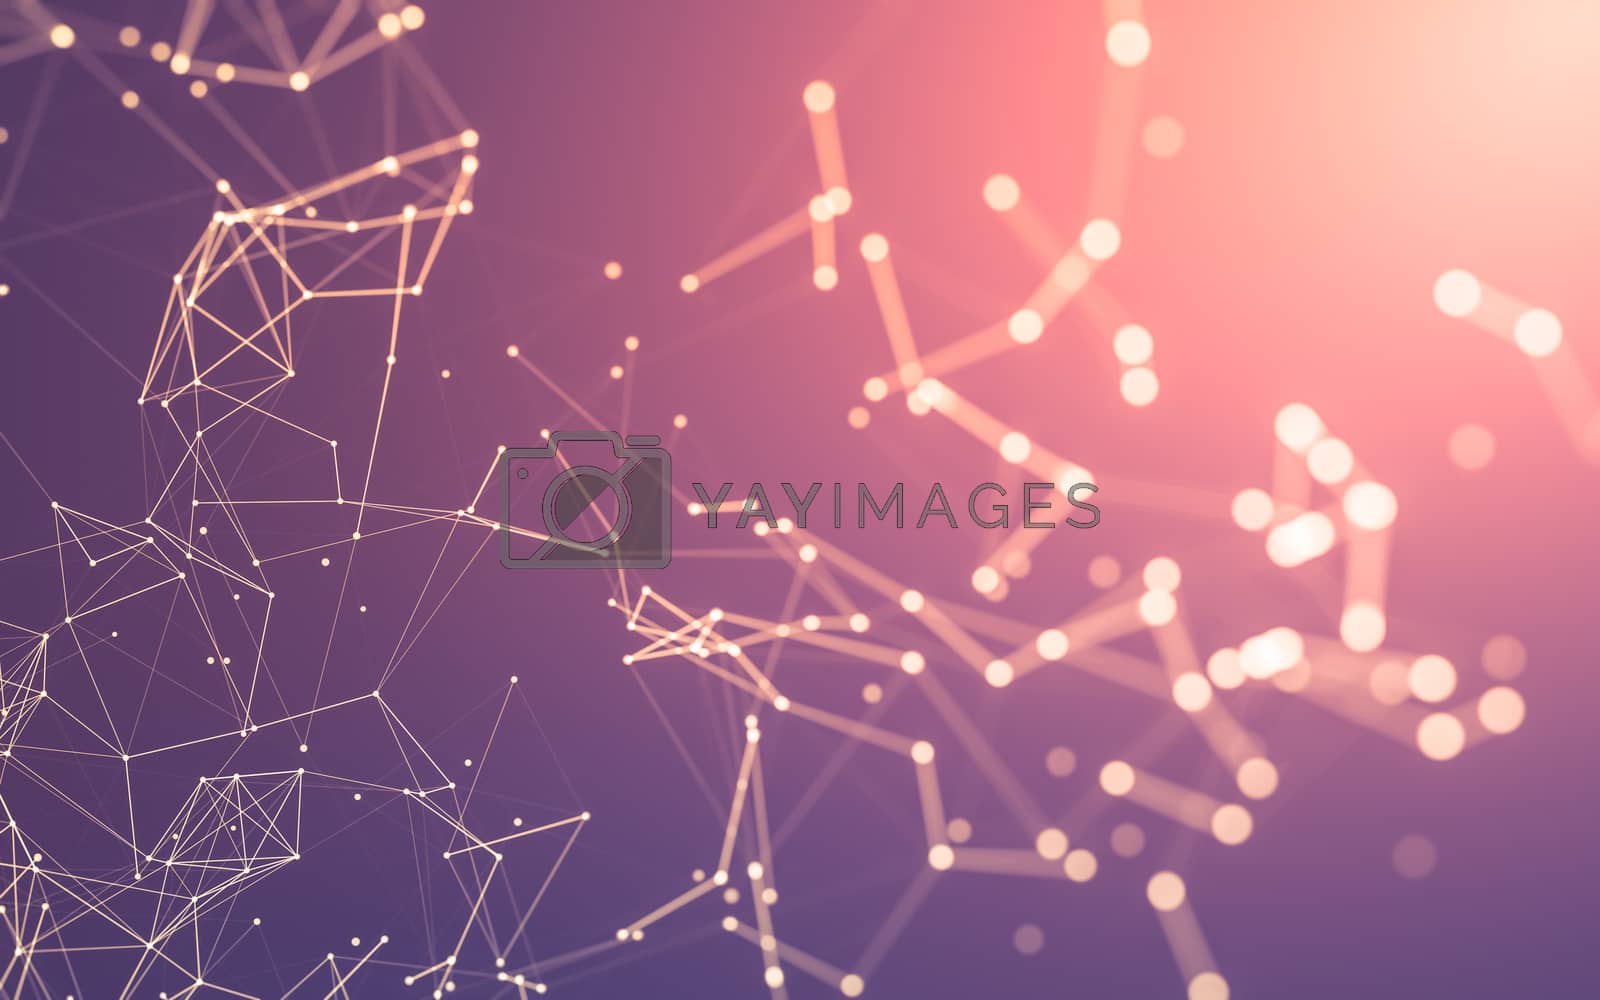 Royalty free image of Abstract polygonal space low poly dark background, 3d rendering by teerawit